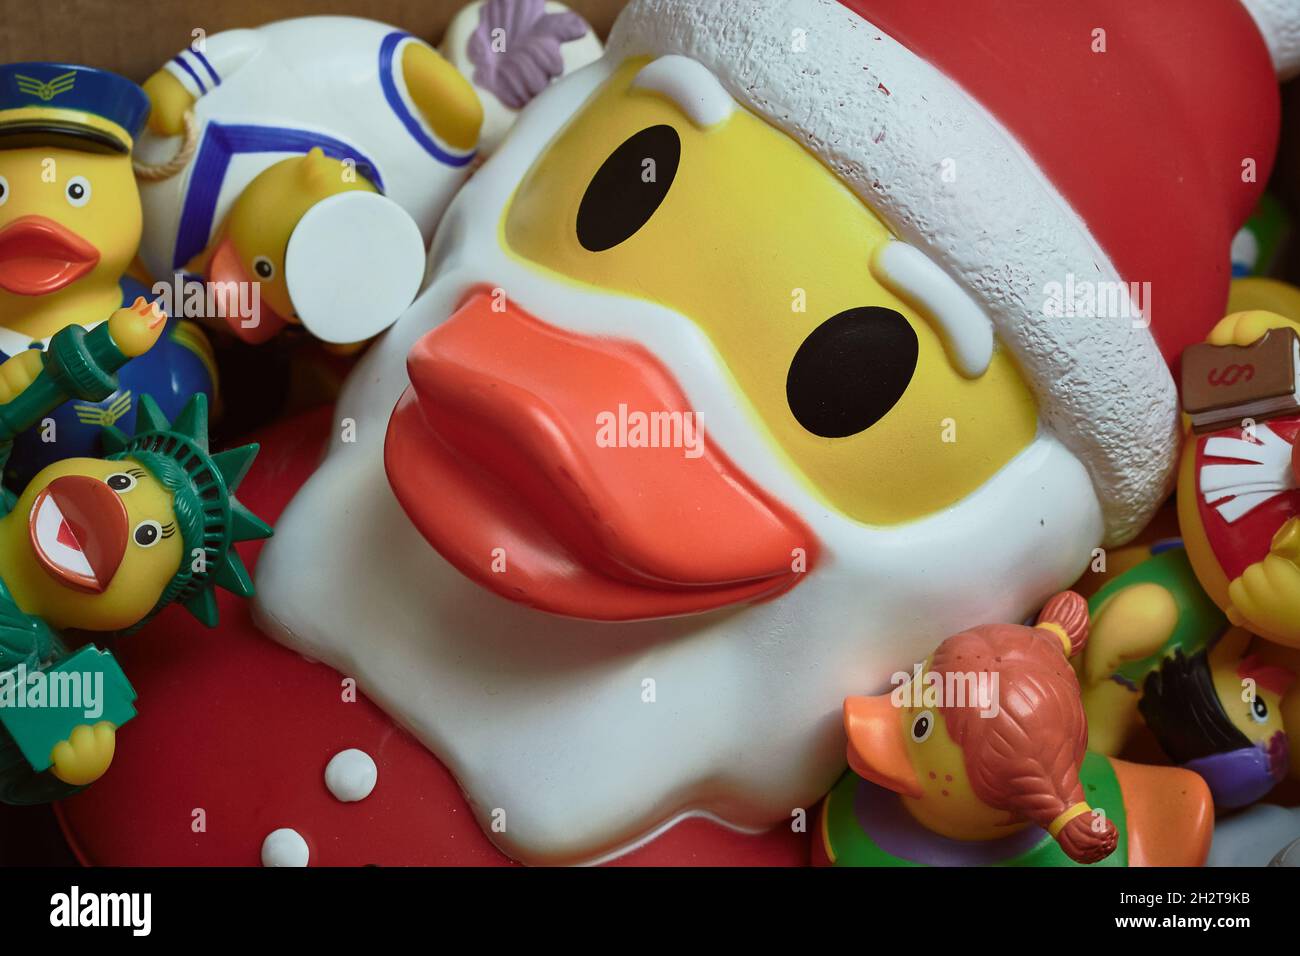 Large Santa Claus bath duck and various small rubber ducks. Stock Photo